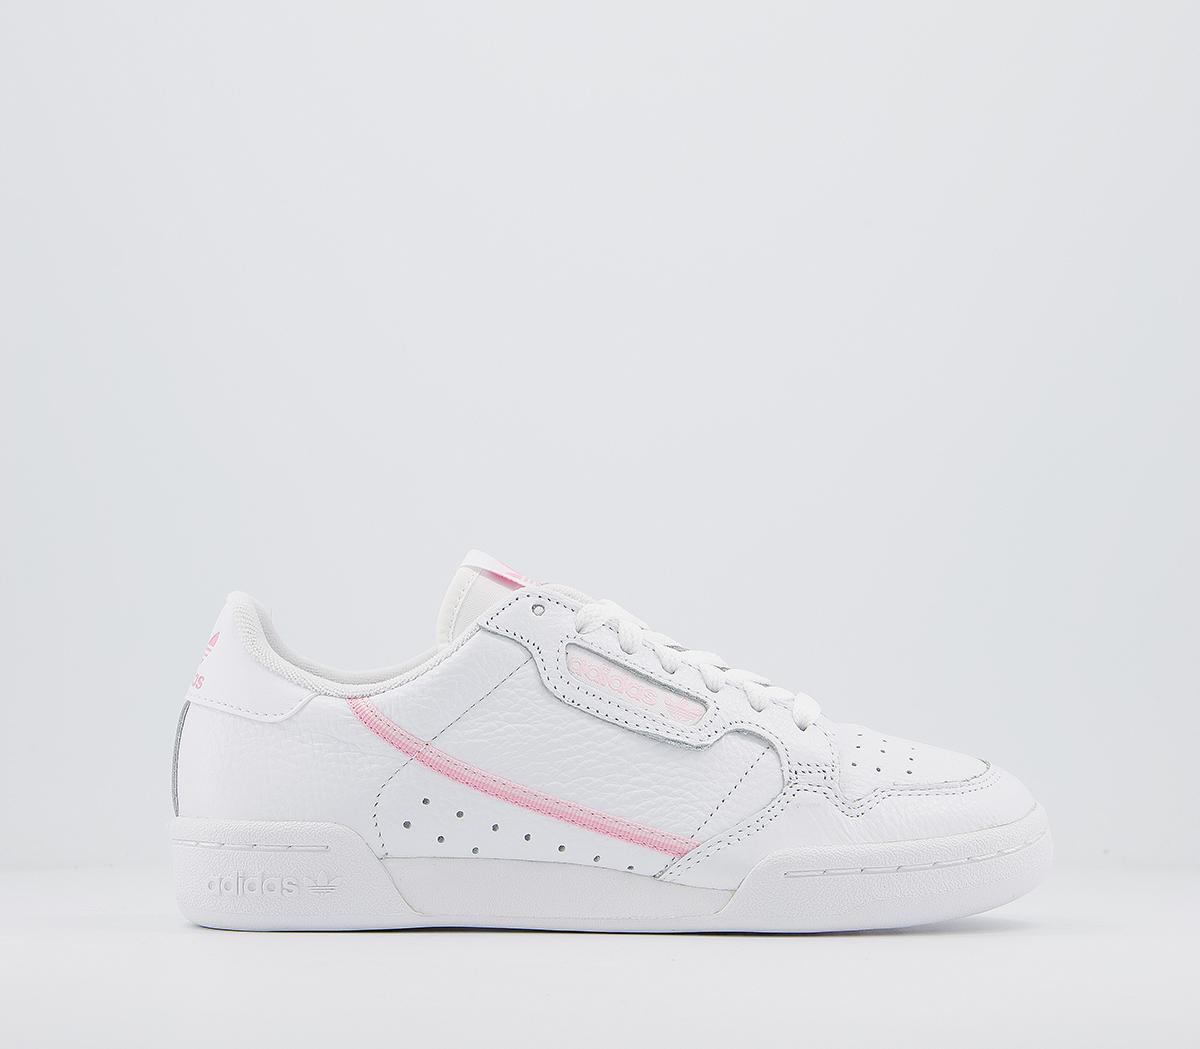 adidas originals white and pink continental 80 sneakers